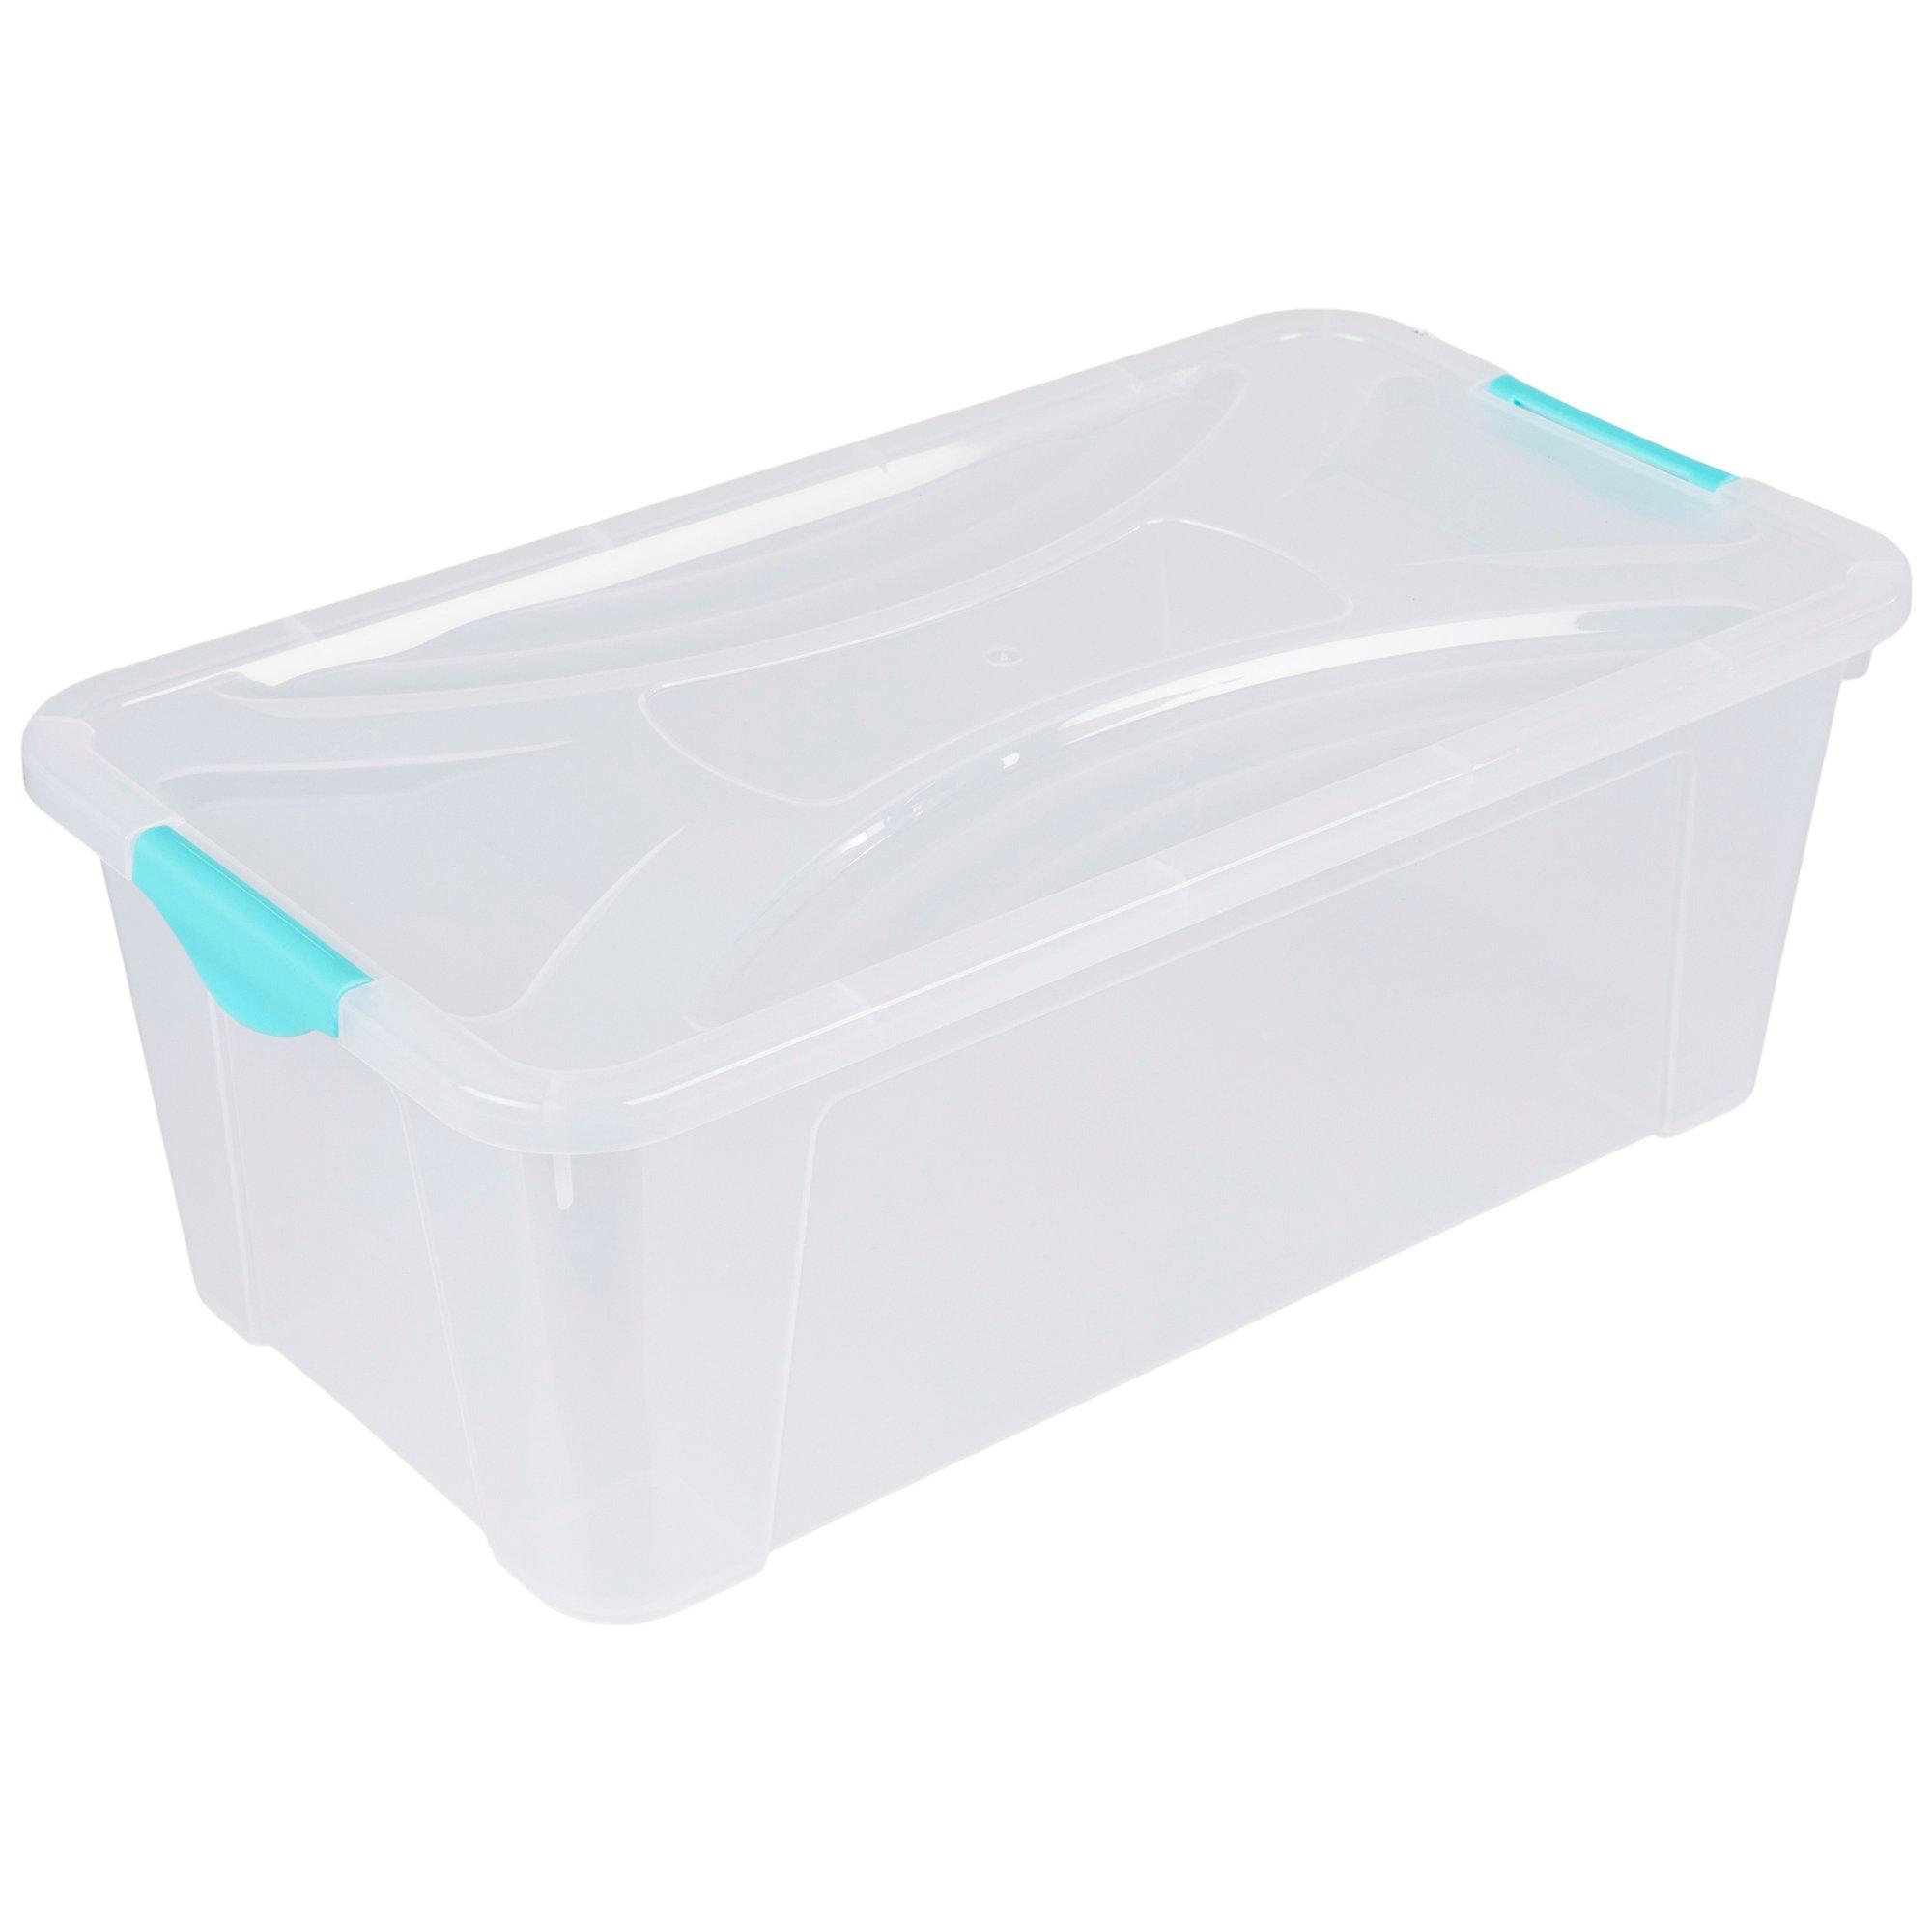 Large Clear Storage Container With Lid and Handles Single, 1 unit - Kroger